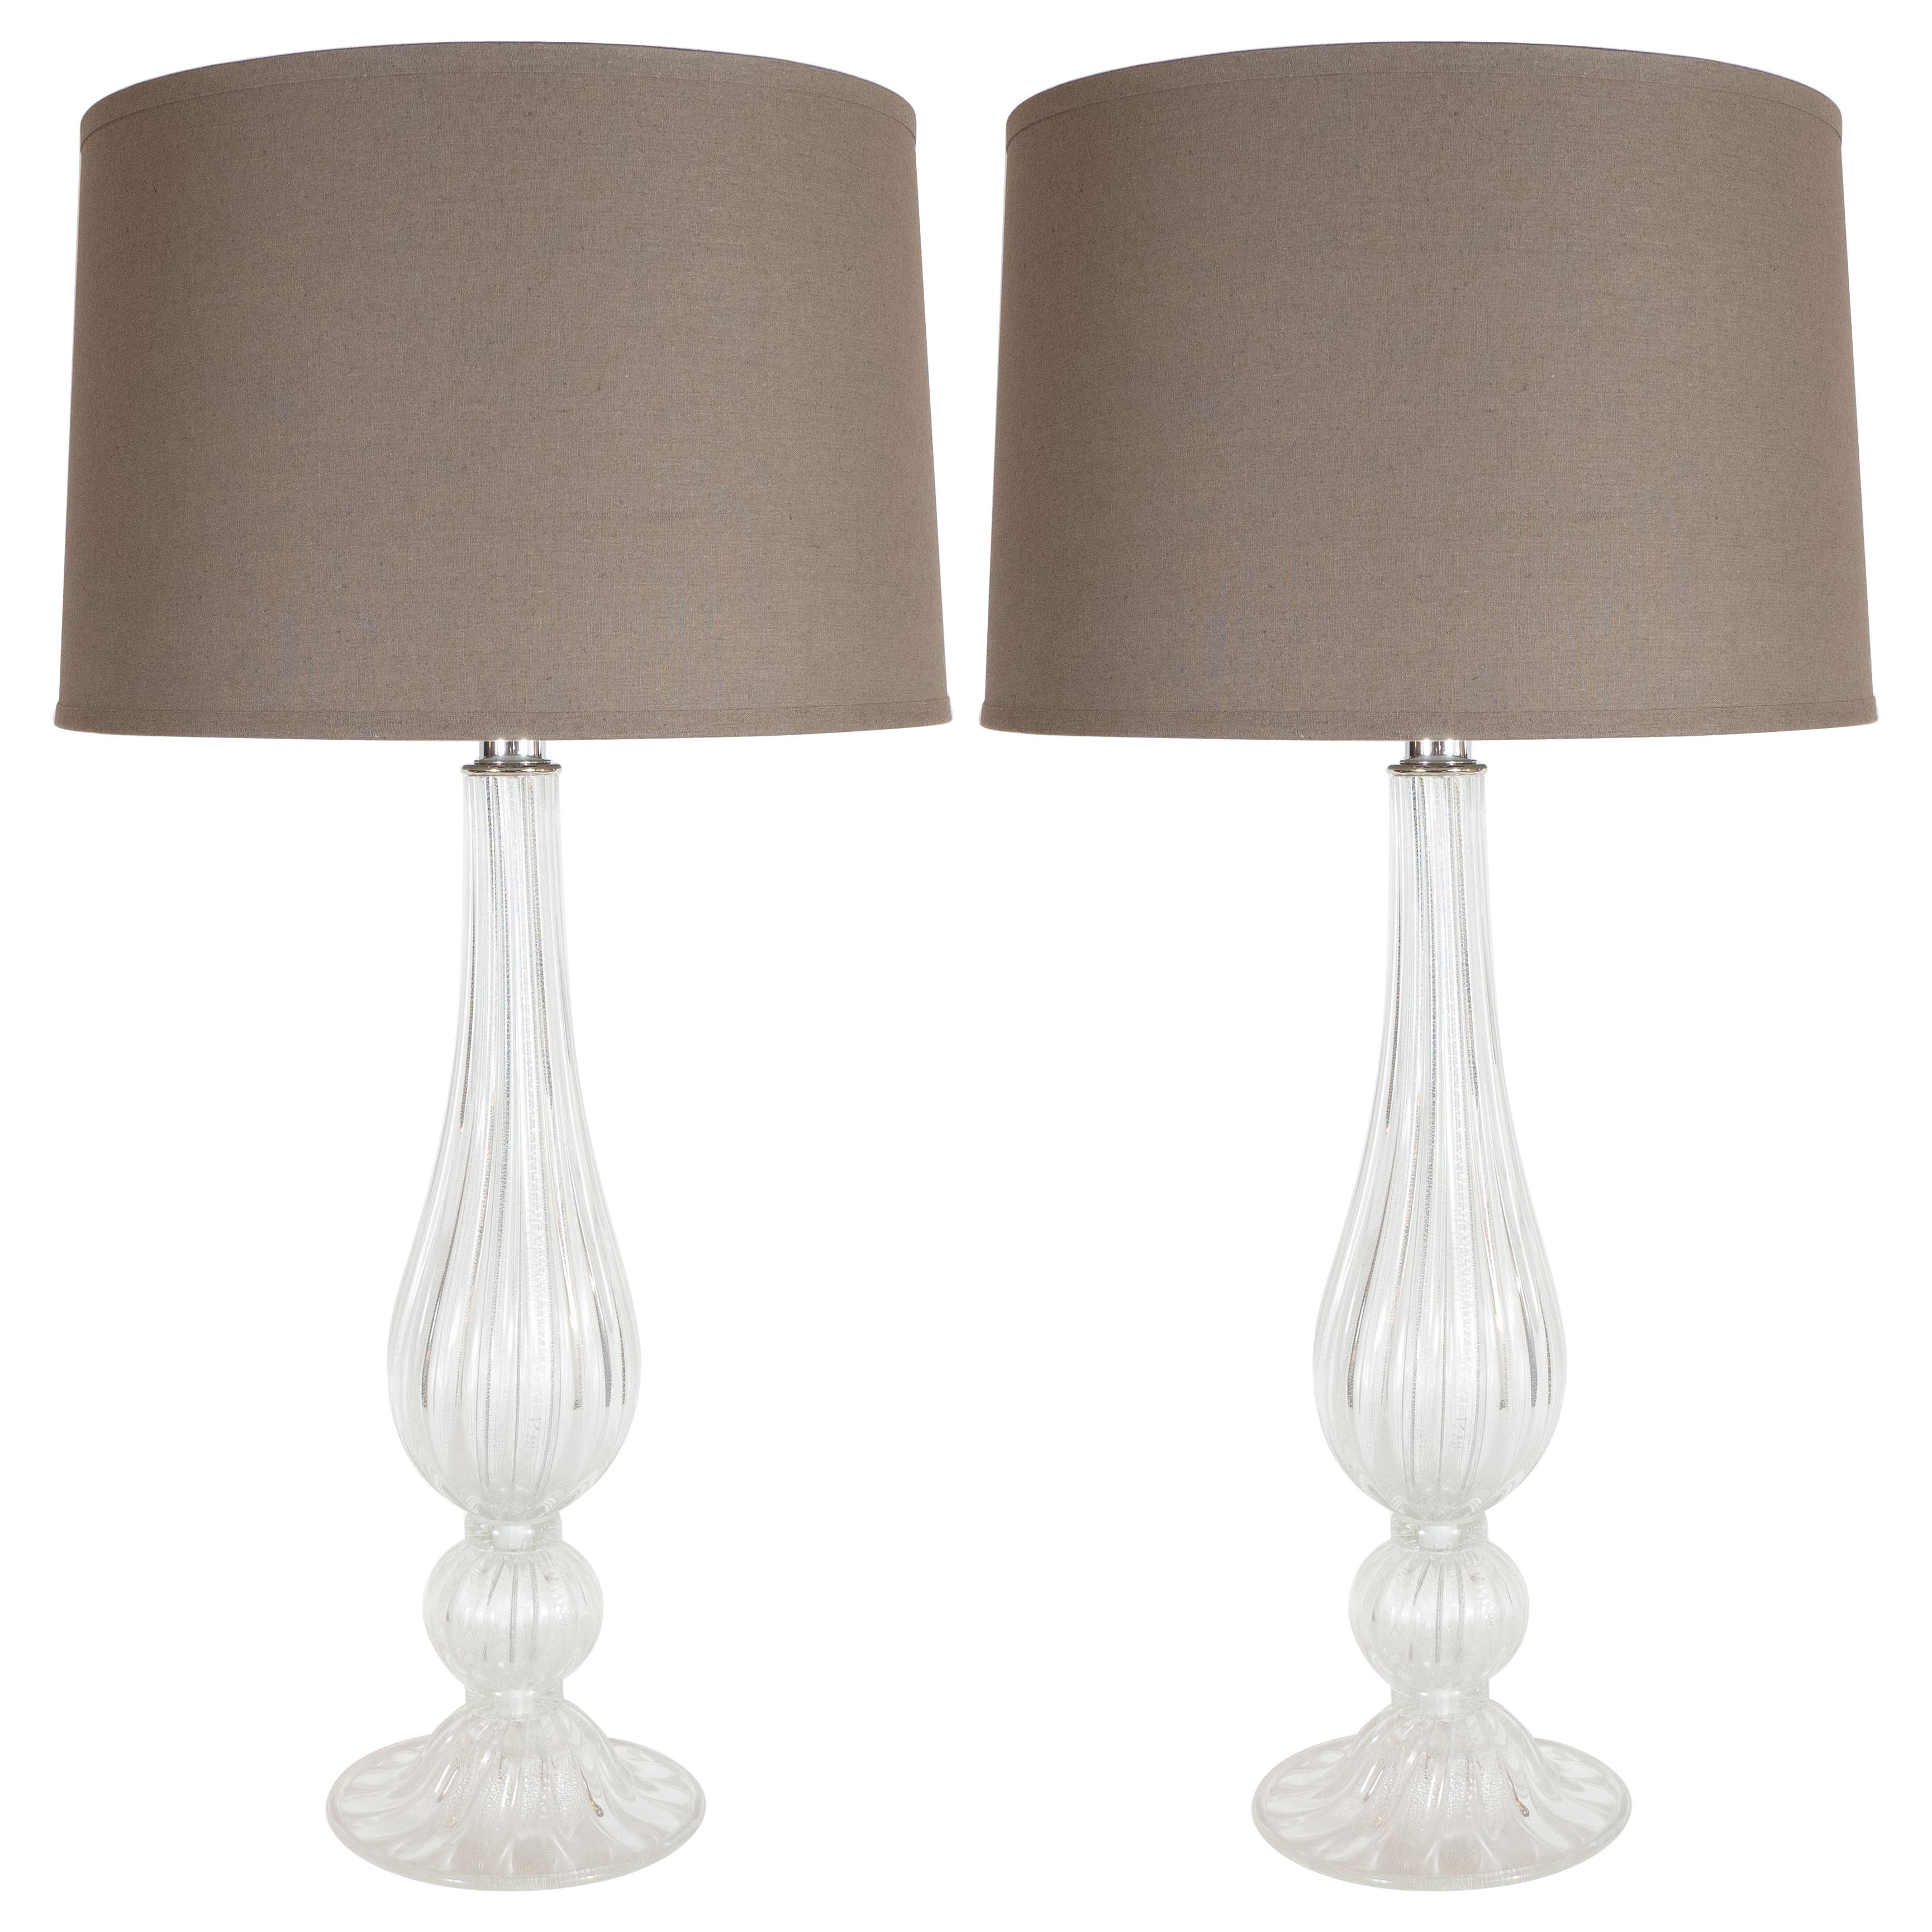 Modernist Handblown Murano Clear Glass Table Lamps with 24kt White Gold Flecks